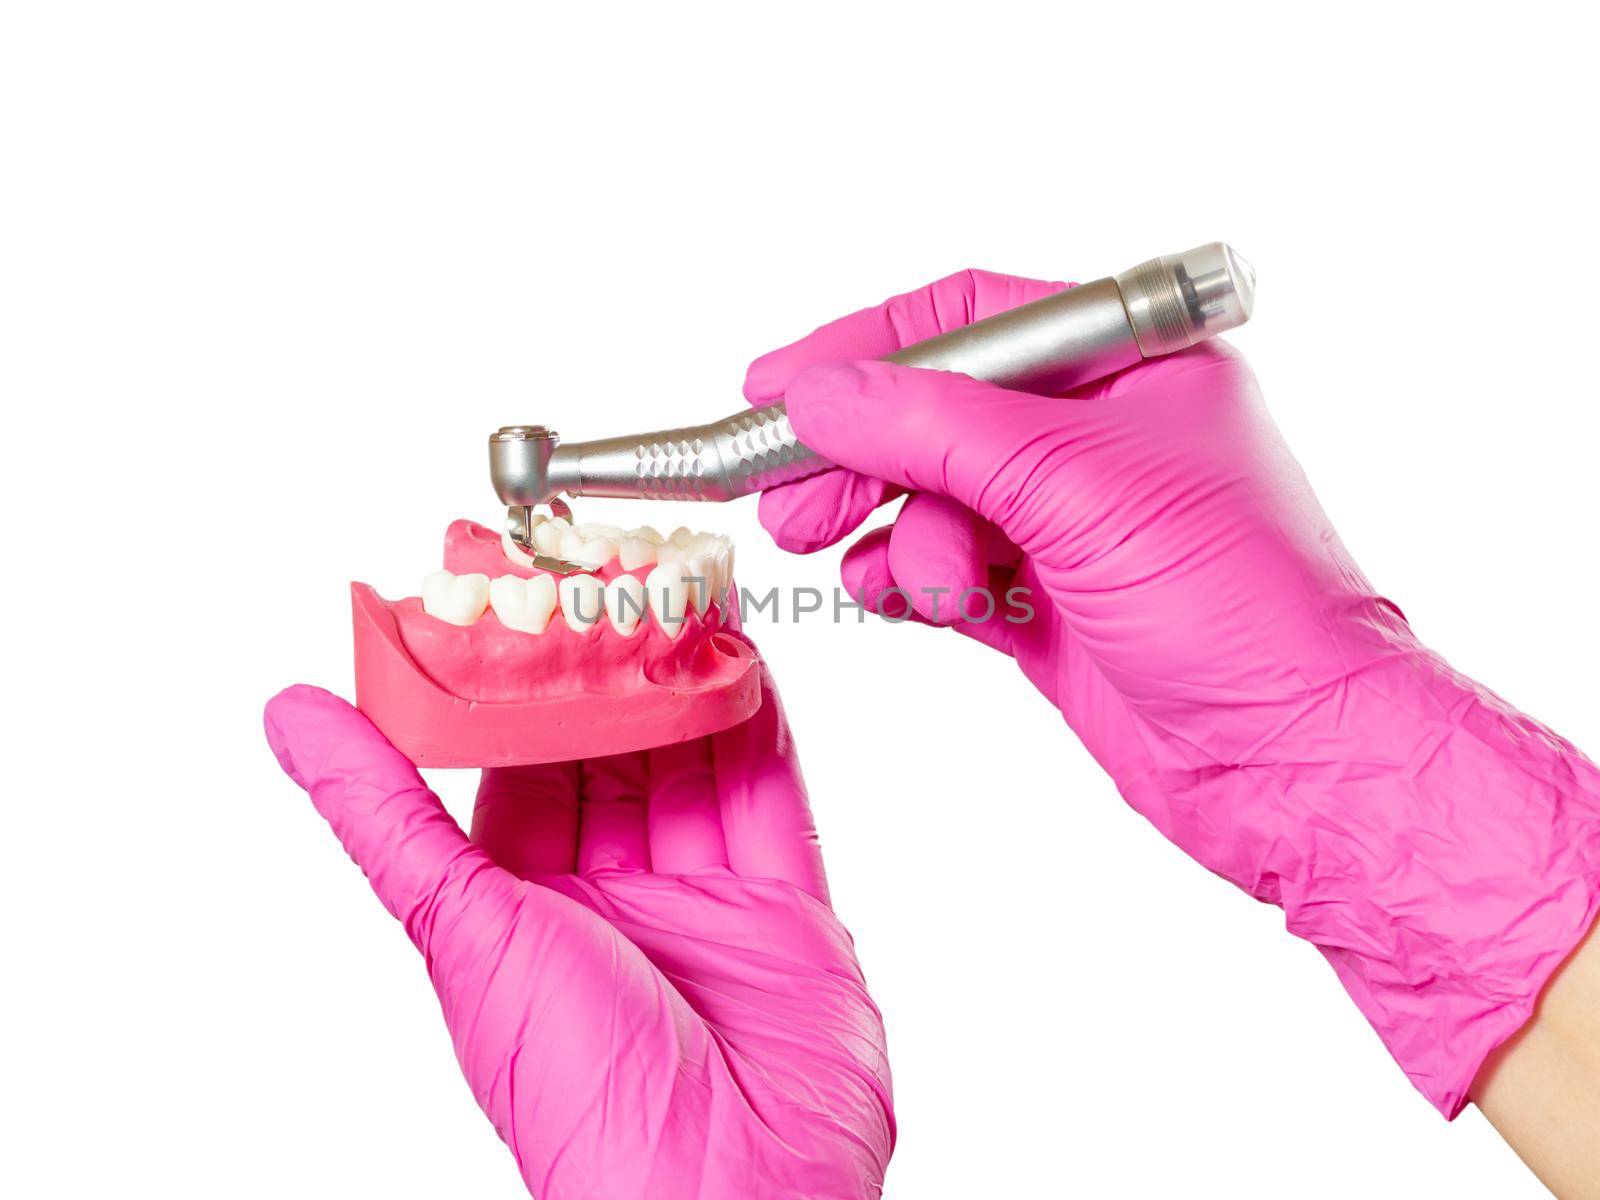 Dental instruments for teeth dental care on blue background by mvg6894